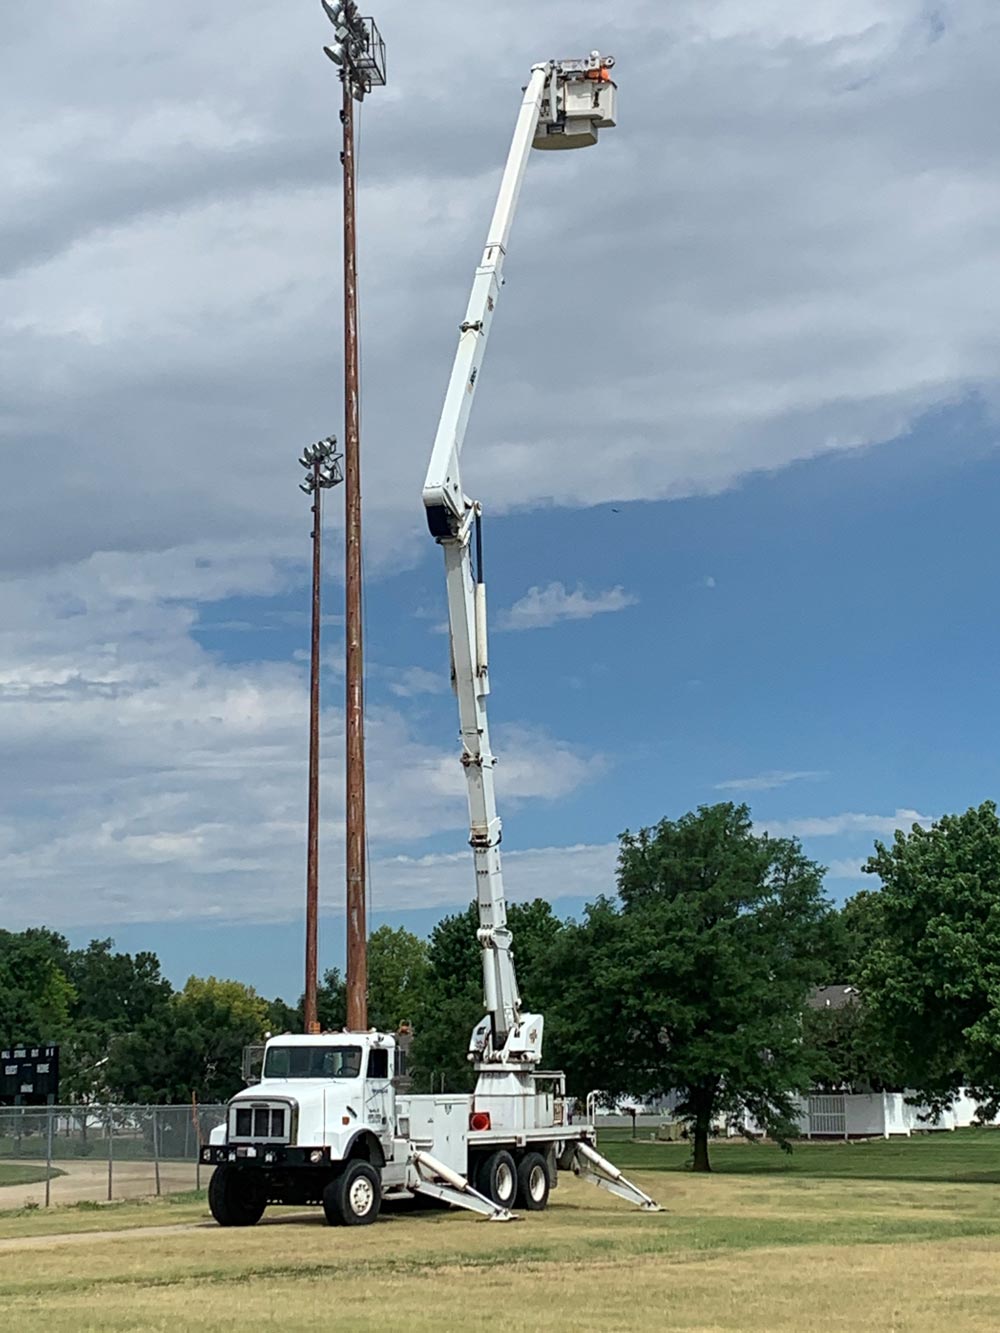 A bucket truck with lift fully extended